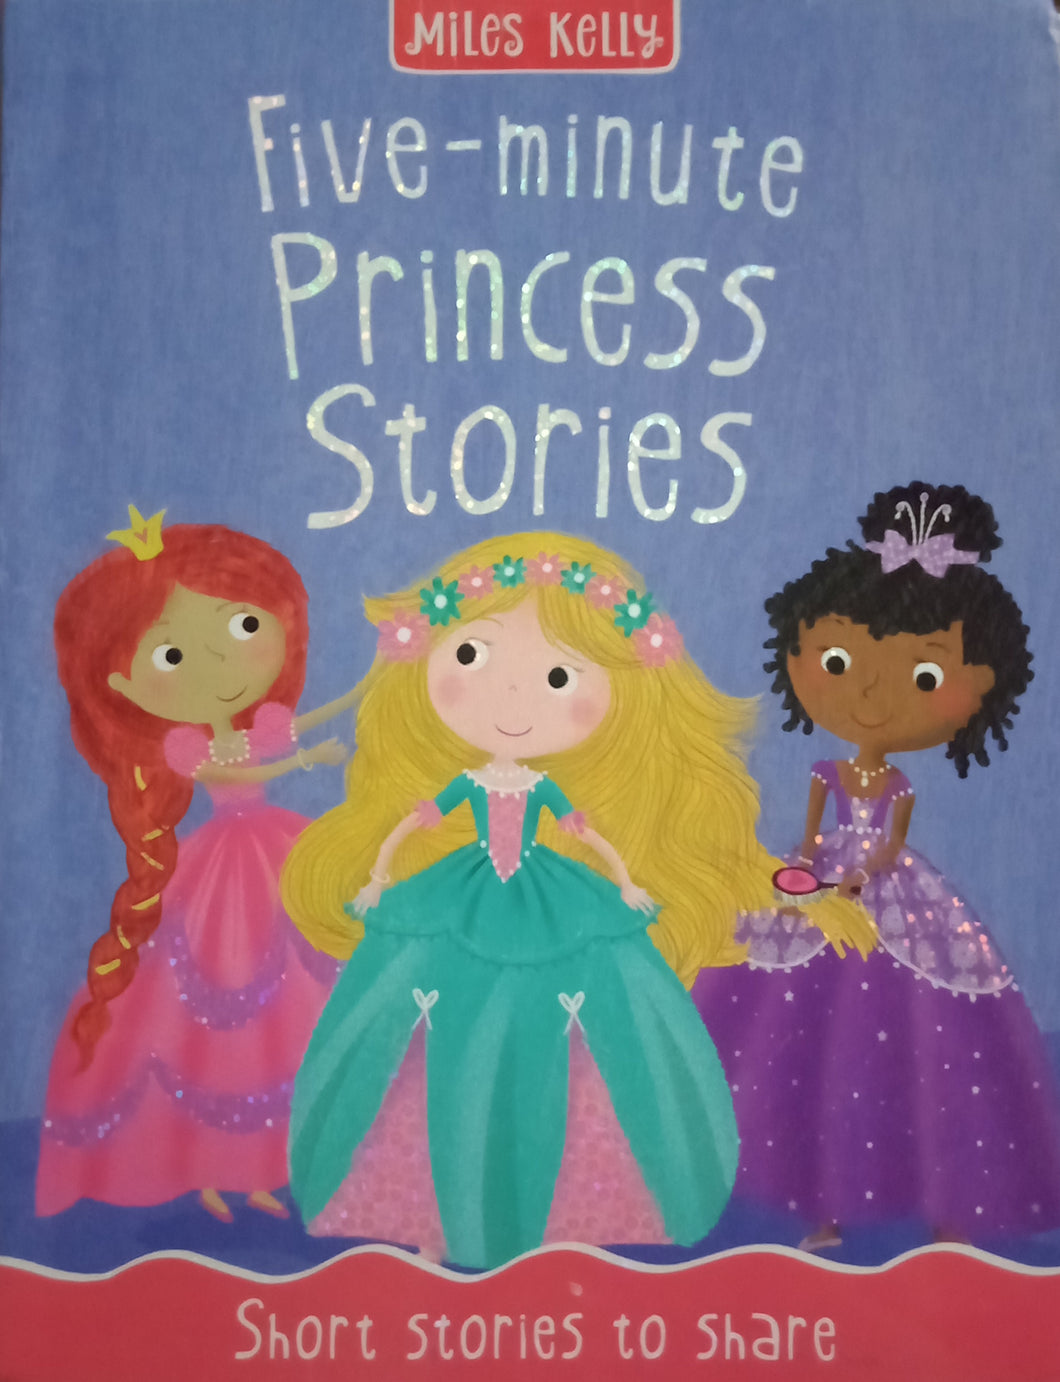 Five-minute Princess Stories by Miles Kelly